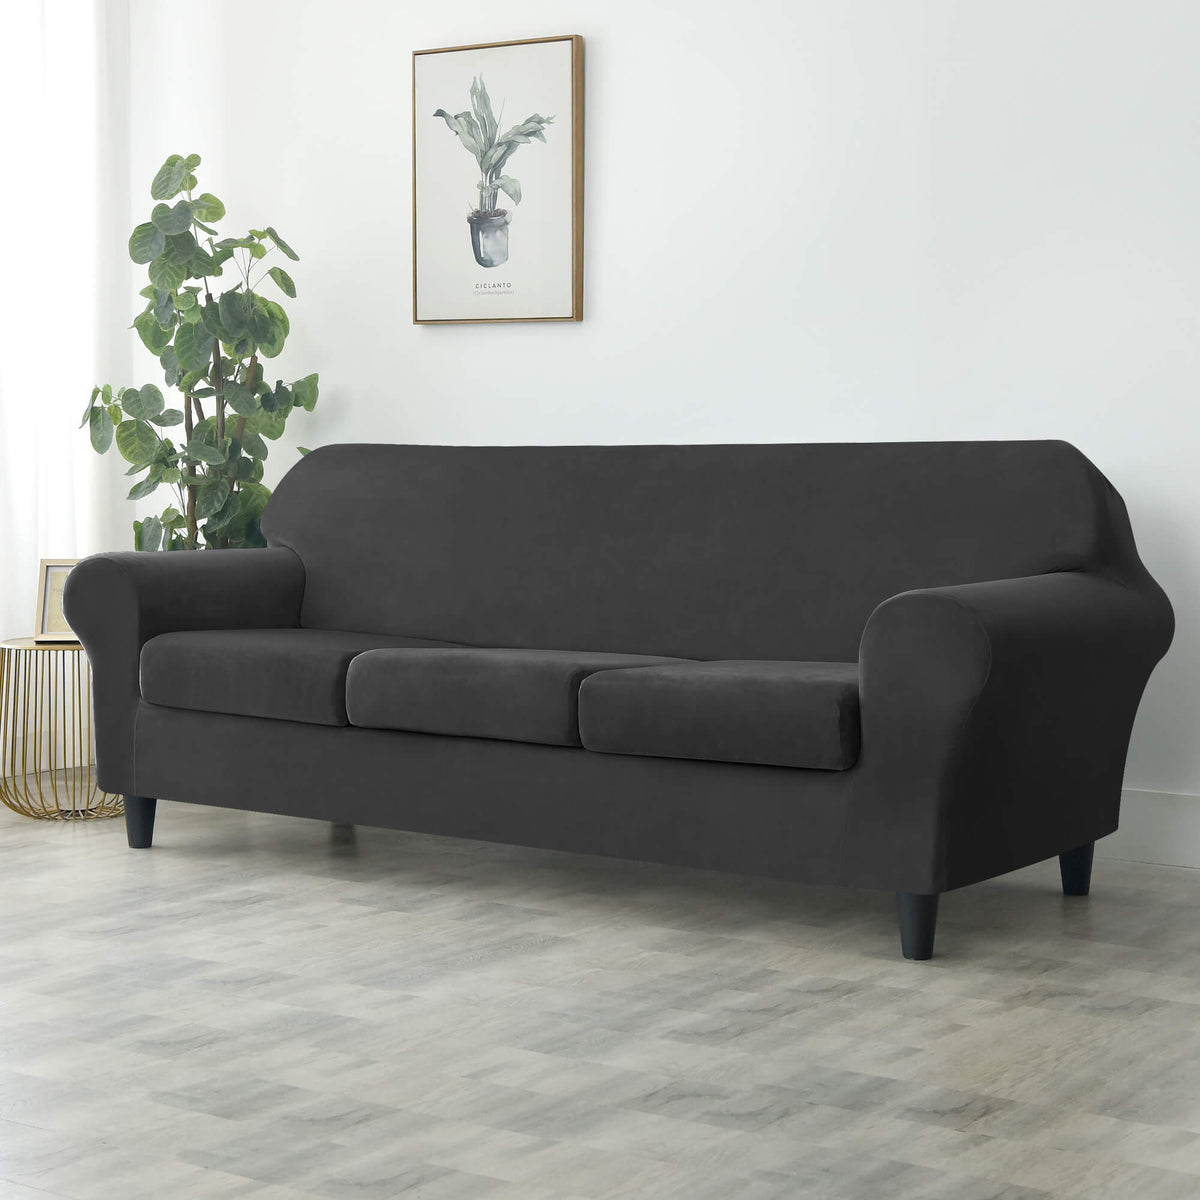 Crfatop Modern Couch Cover Stretch Armchair Sofa Seat Slipcovers with Elastic Bottom 3-seaterBlack